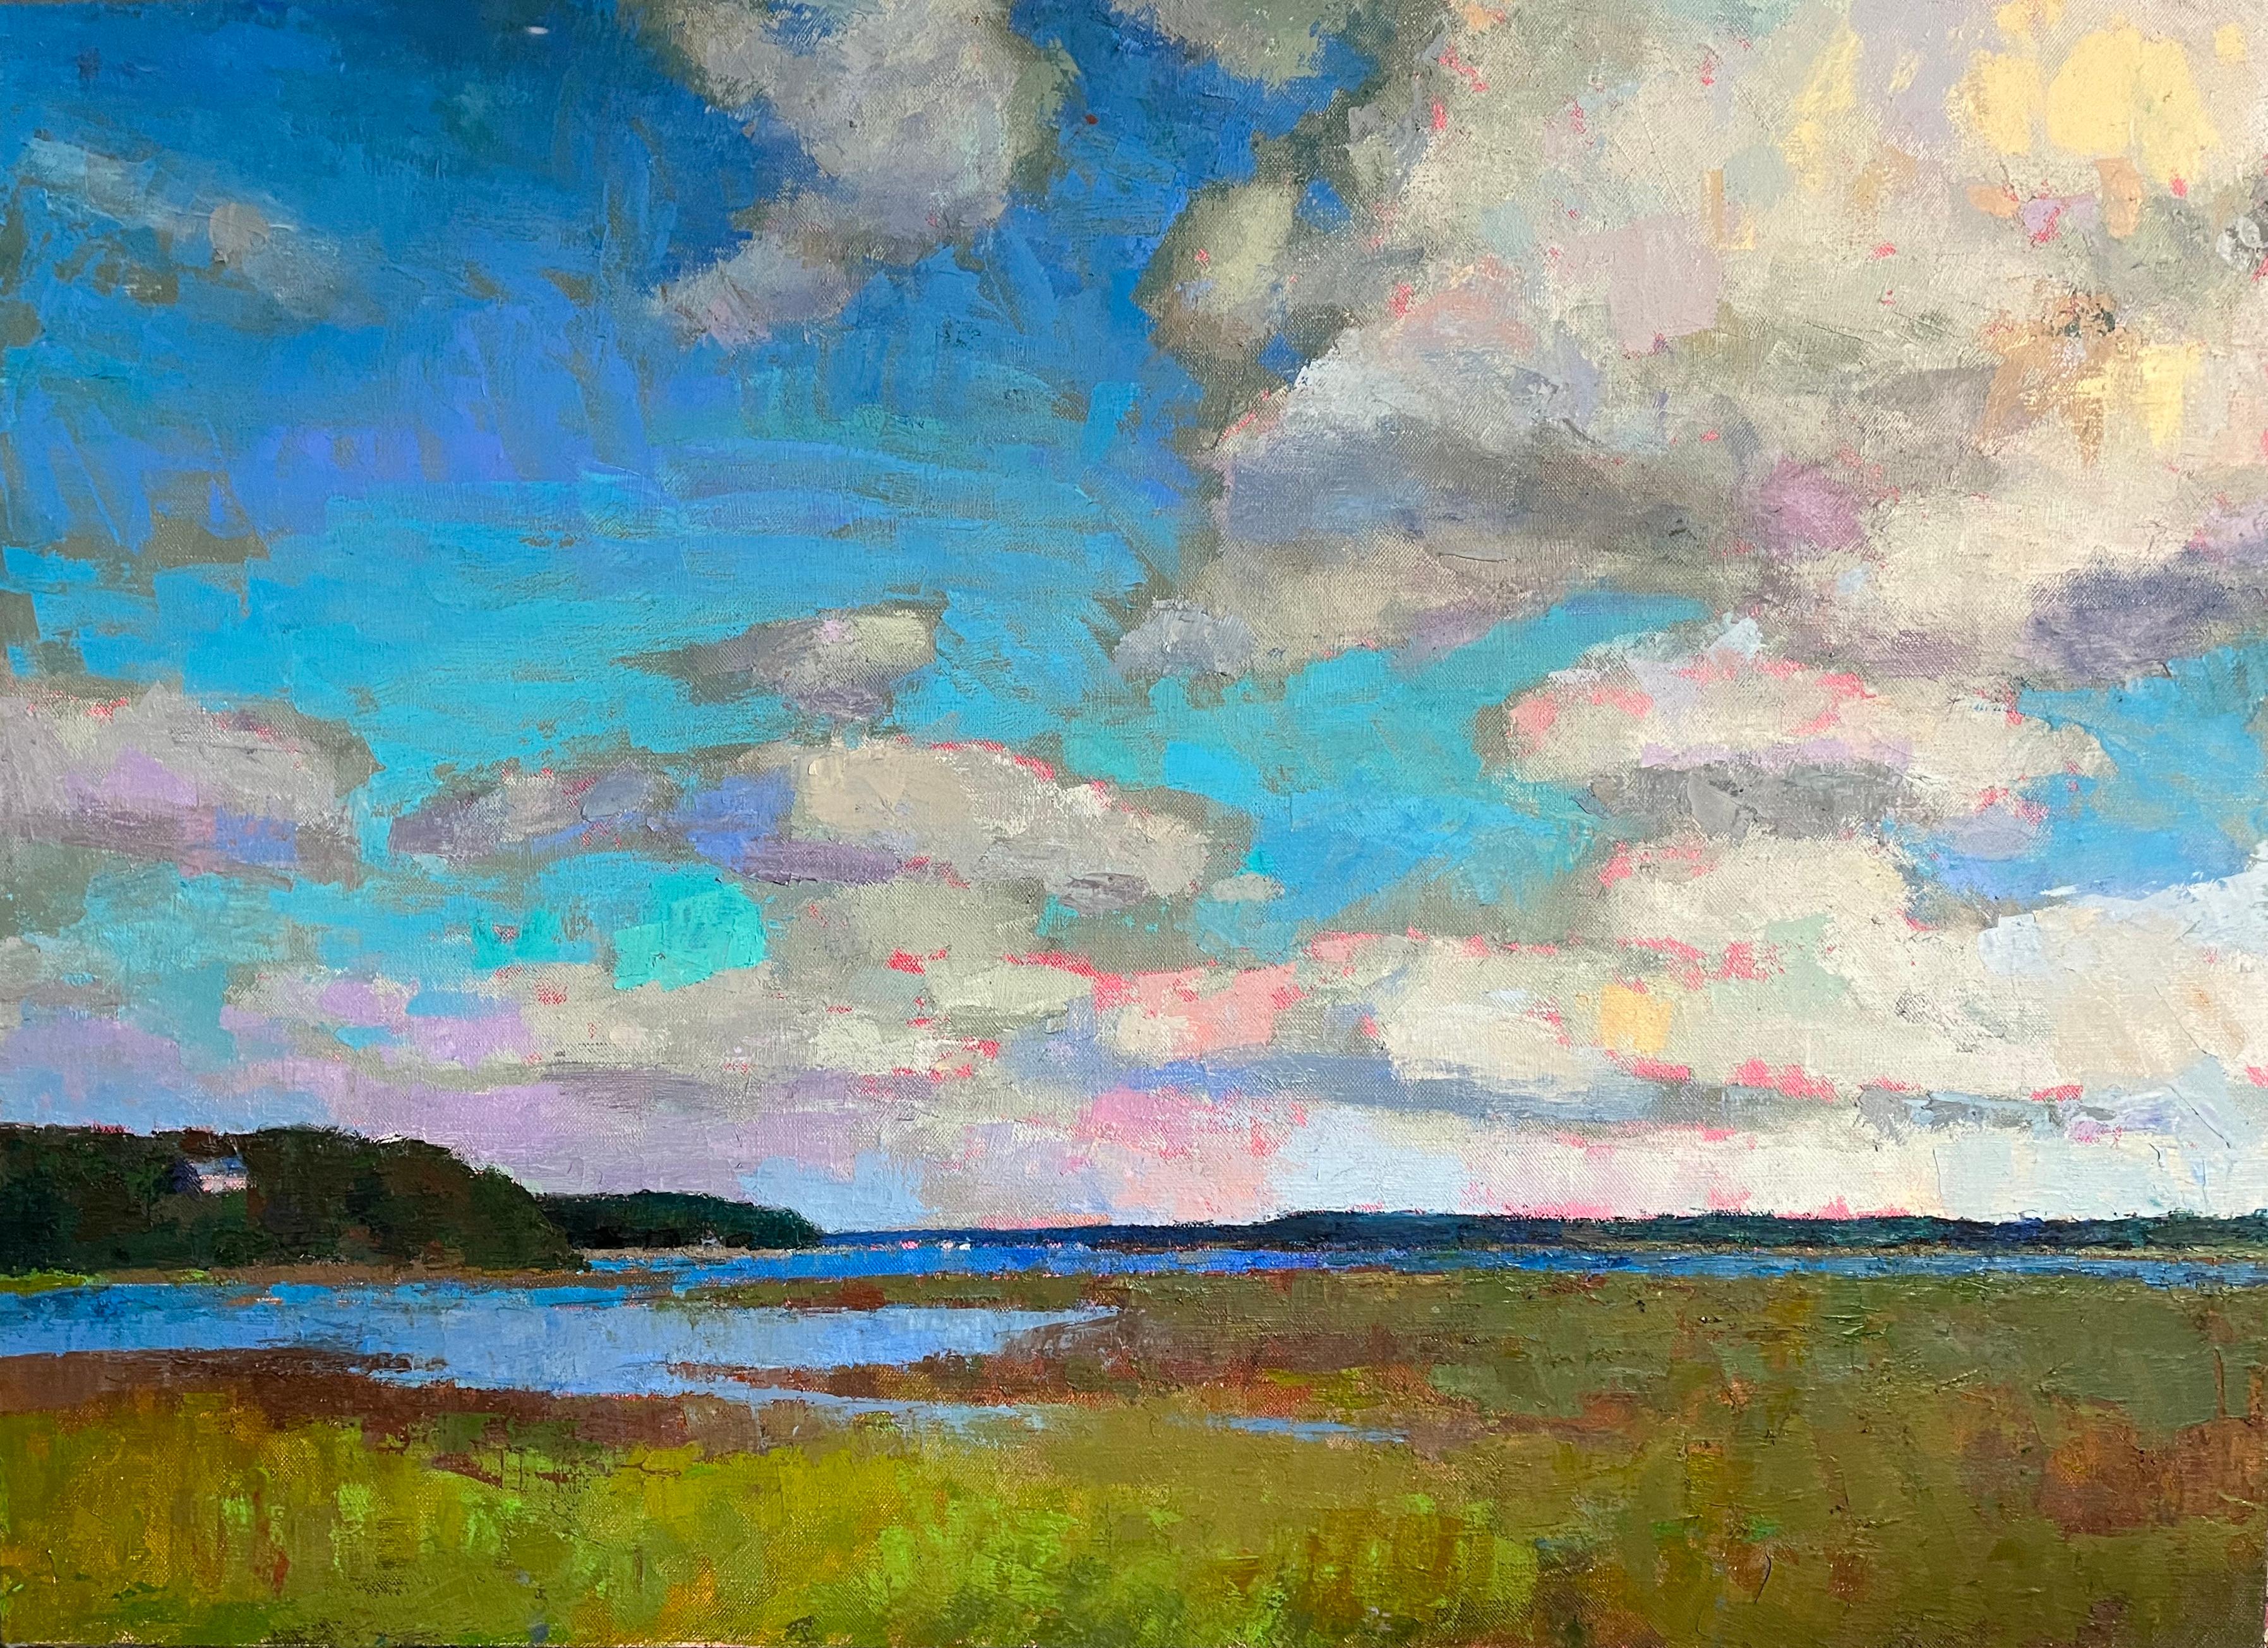 Larry Horowitz Landscape Painting - "Cumulus Summer" Landscape painting of a lightly cloudy blue sky and green field